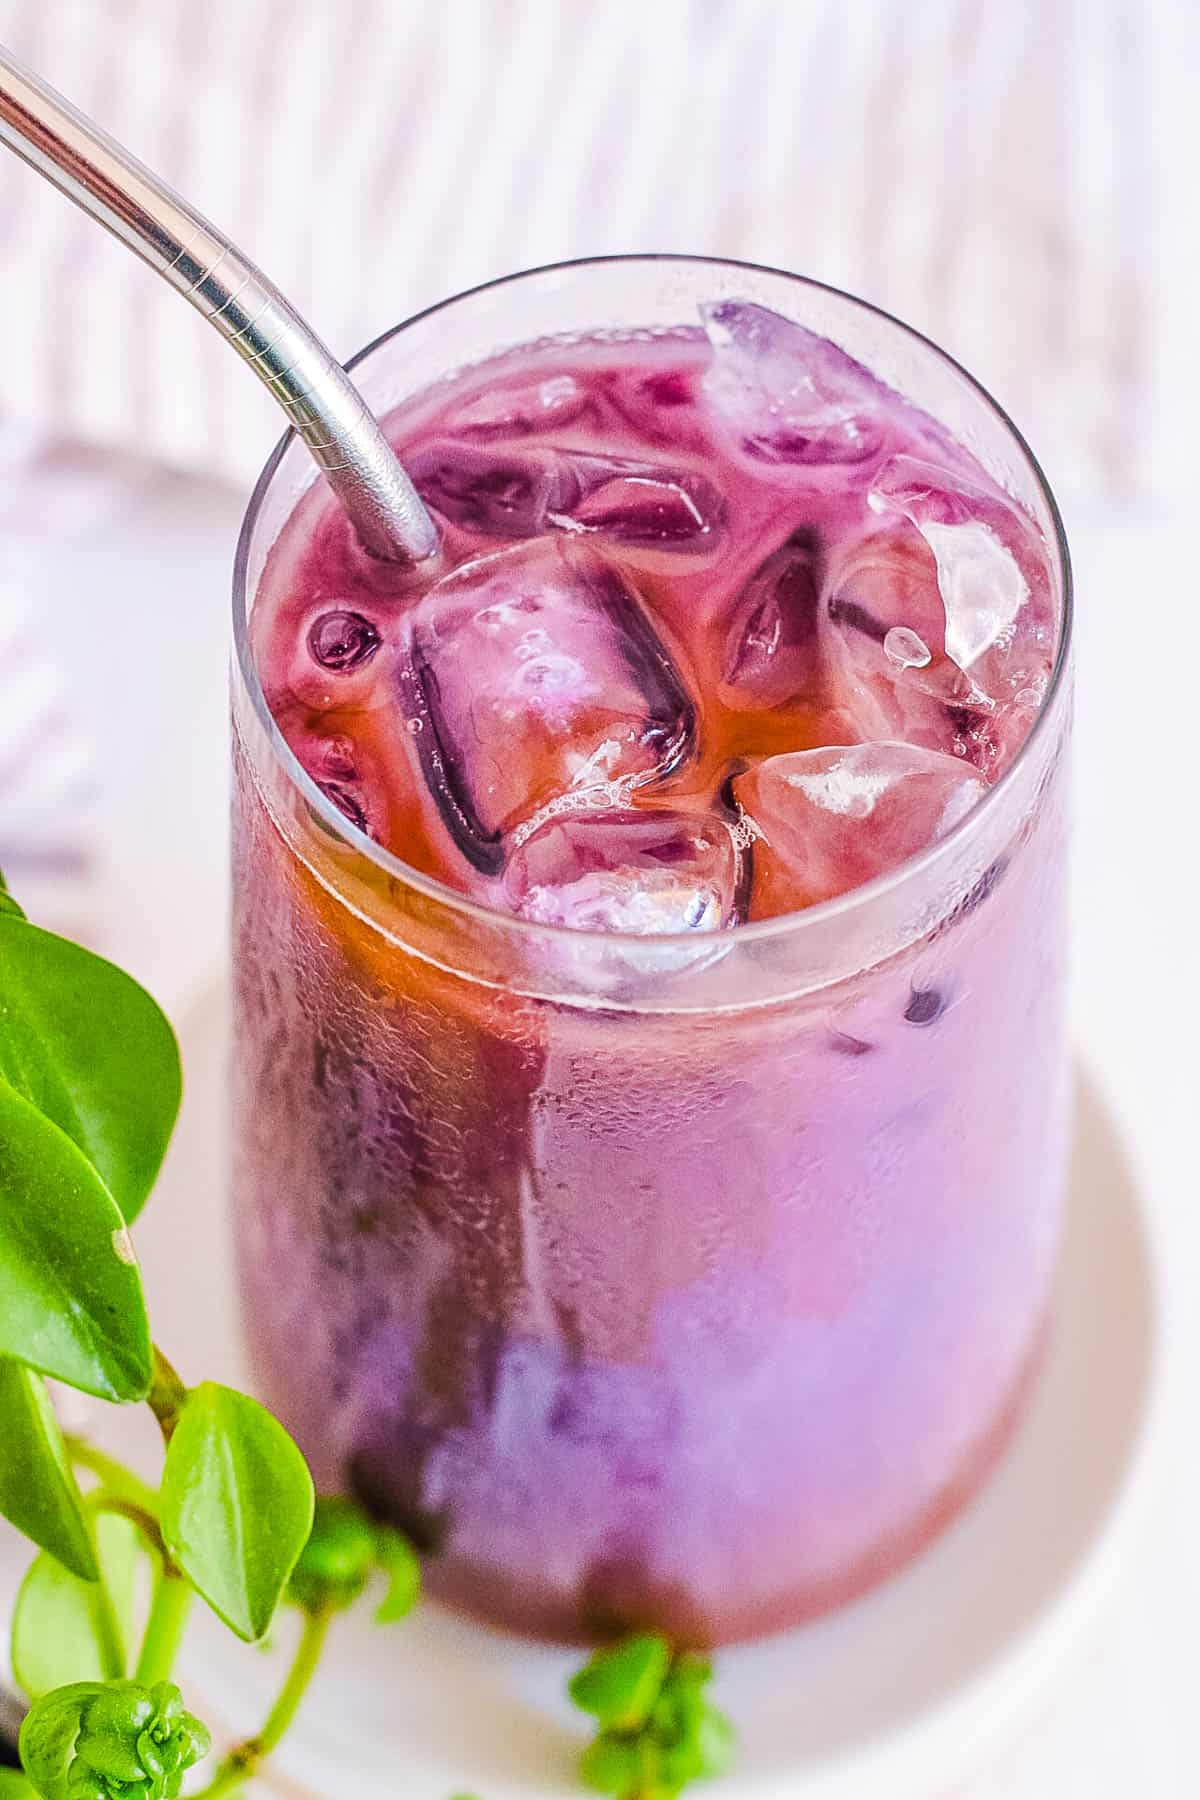 iced ube latte (purple yam latte) in a glass with a straw